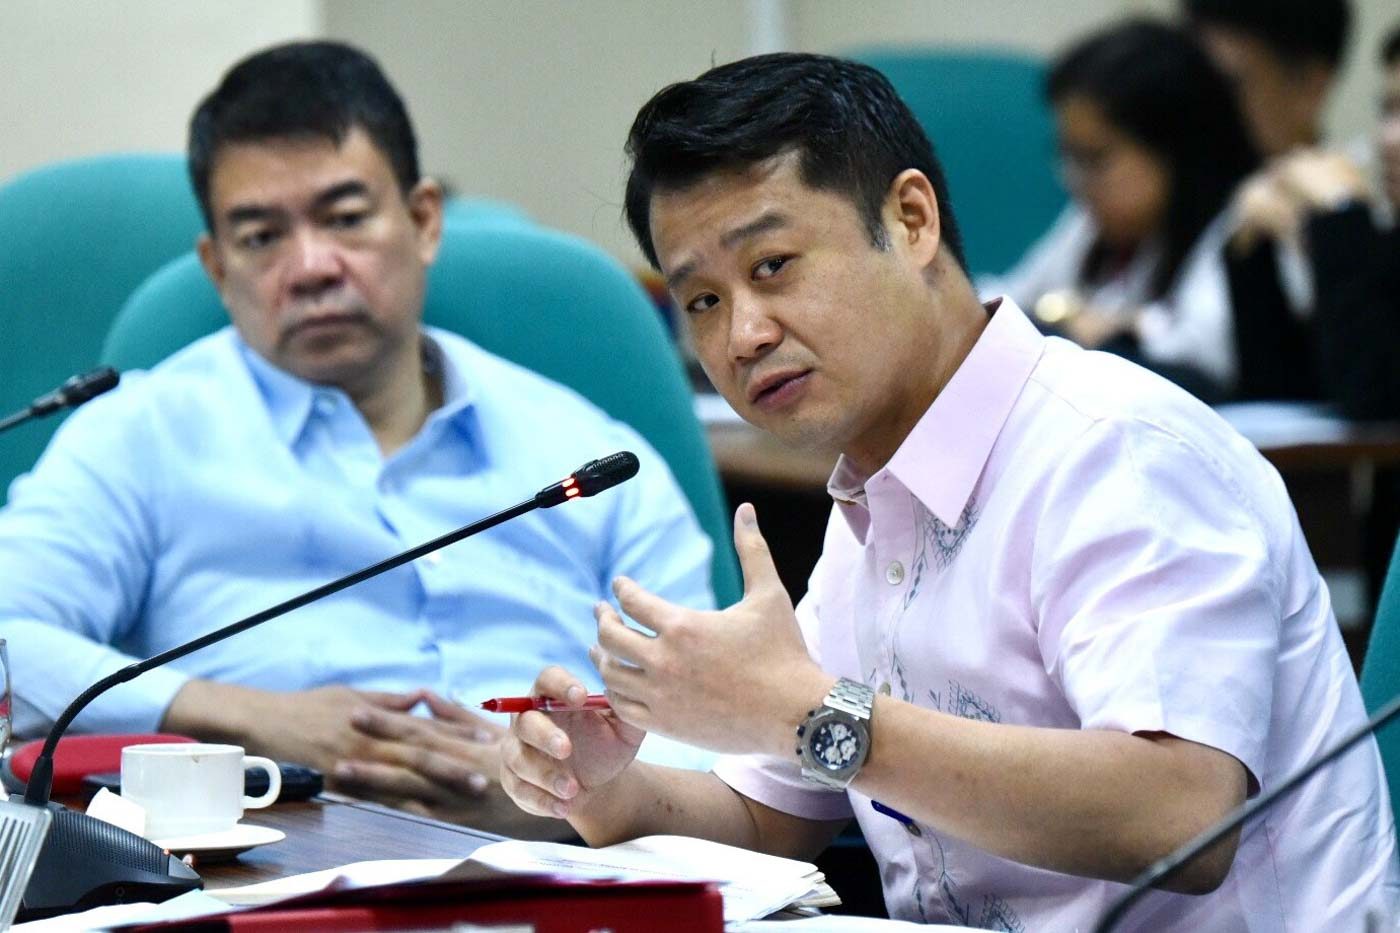 Construction of nuclear power plants in PH risky – Gatchalian